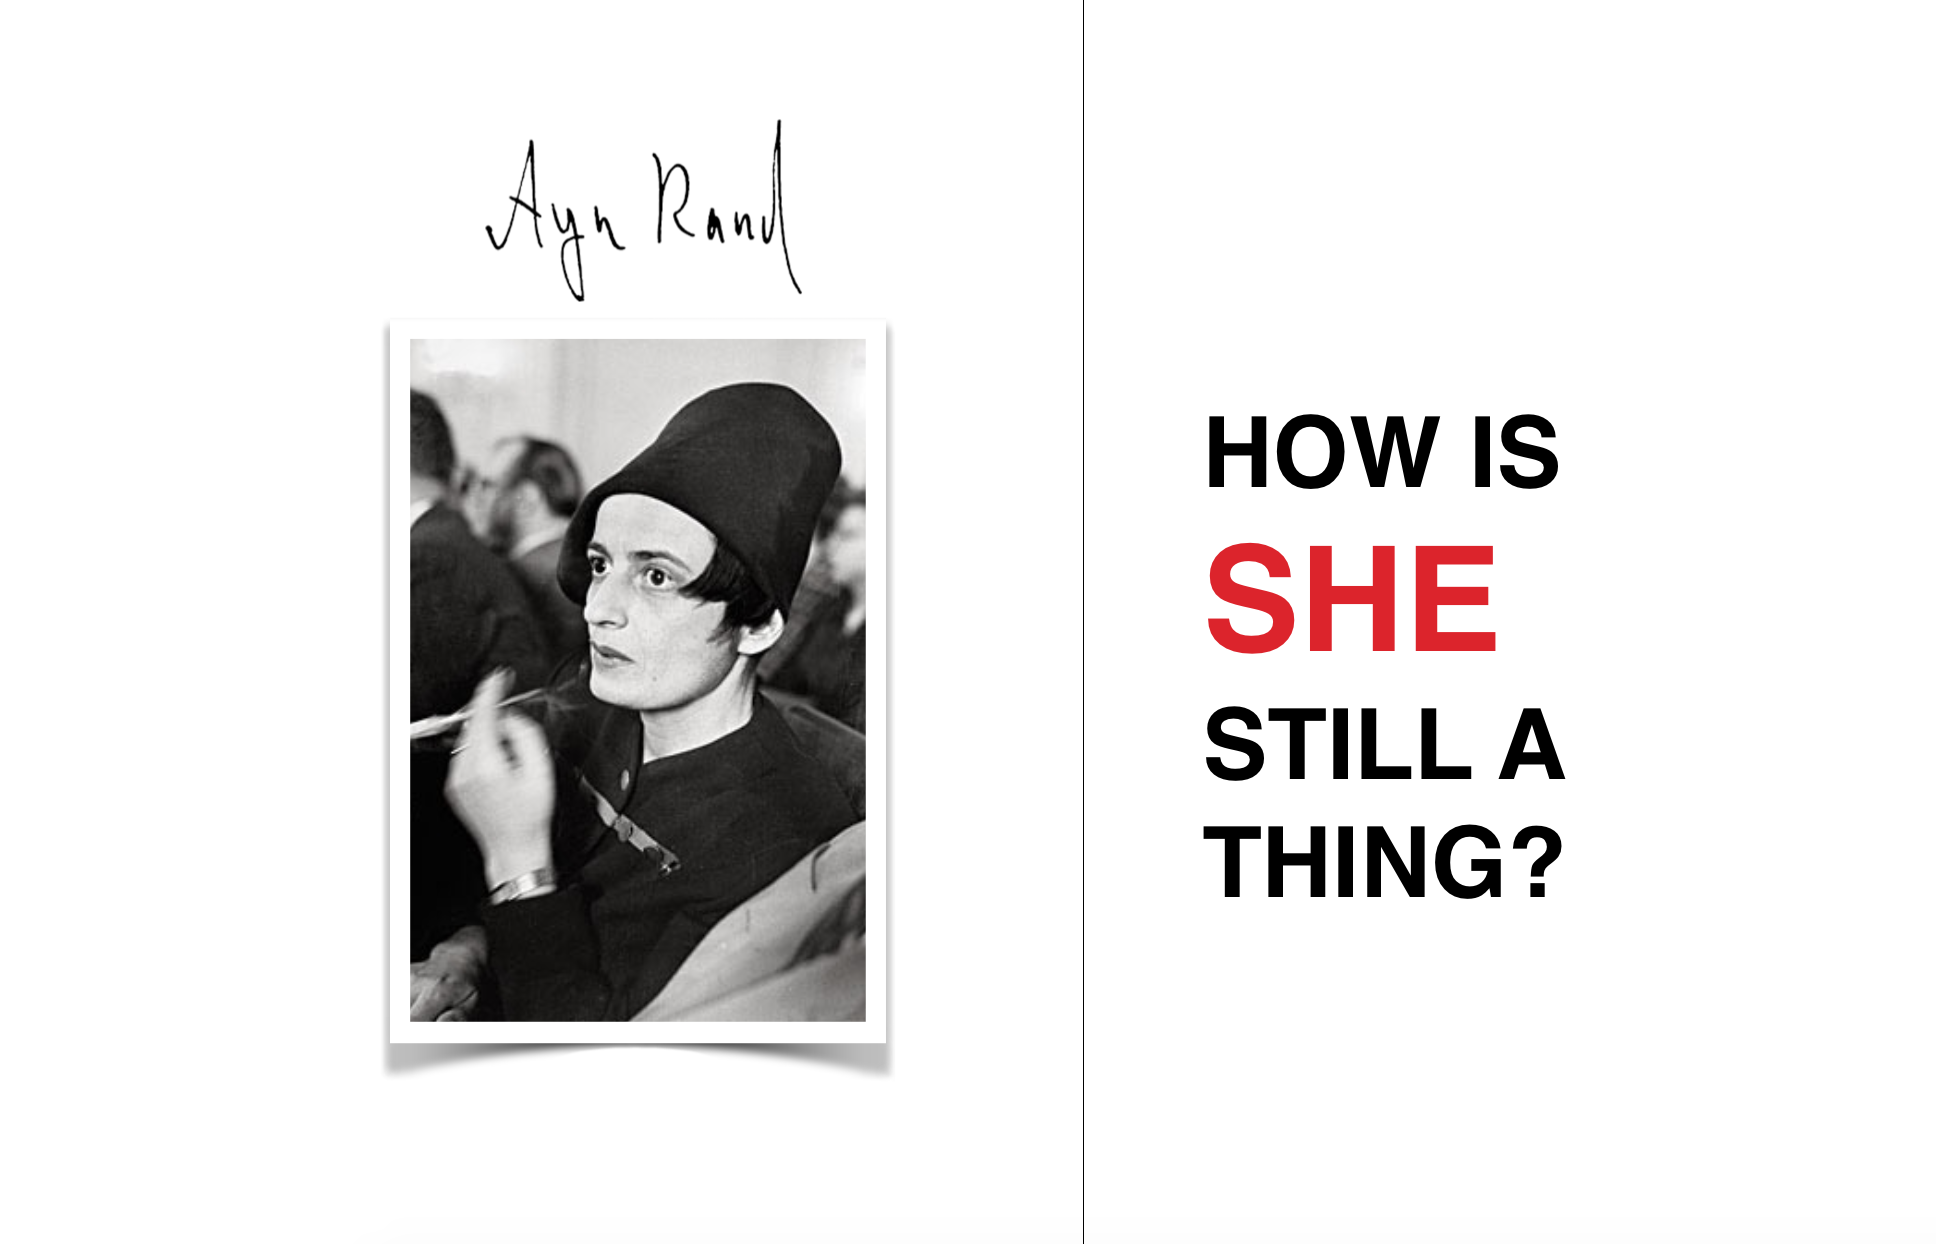 How is Ayn Rand still a thing? From ridicule to serious concern